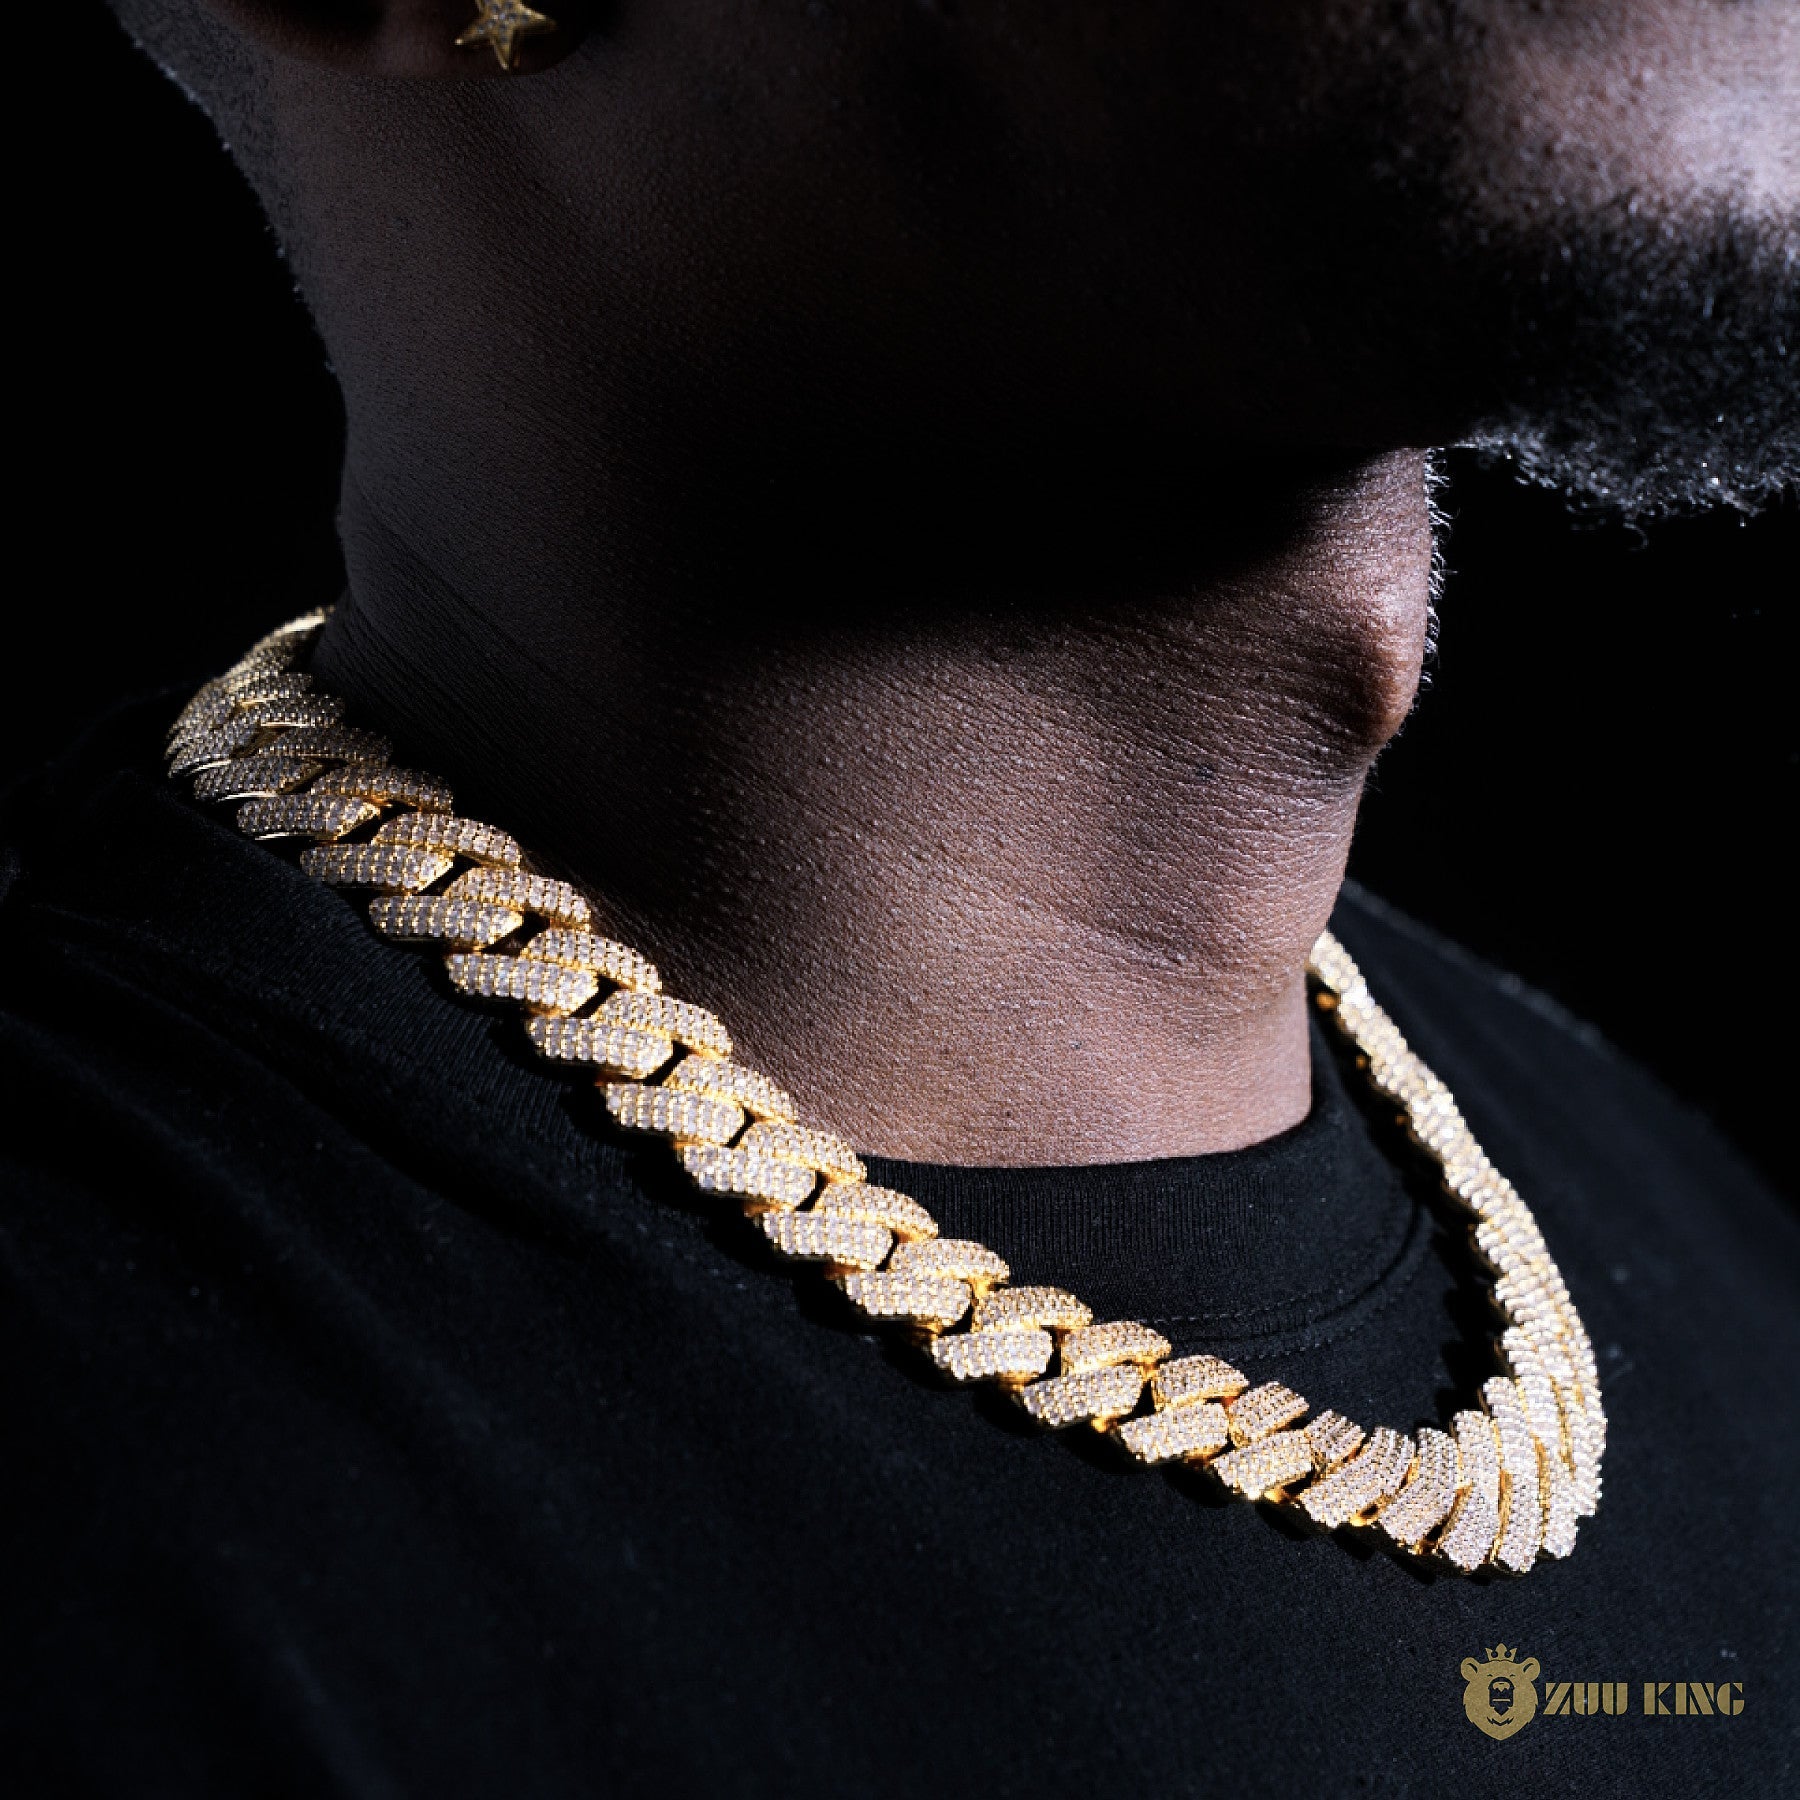 19mm 3-row Iced Prong Cuban Chain In 18k Gold ZUU KING